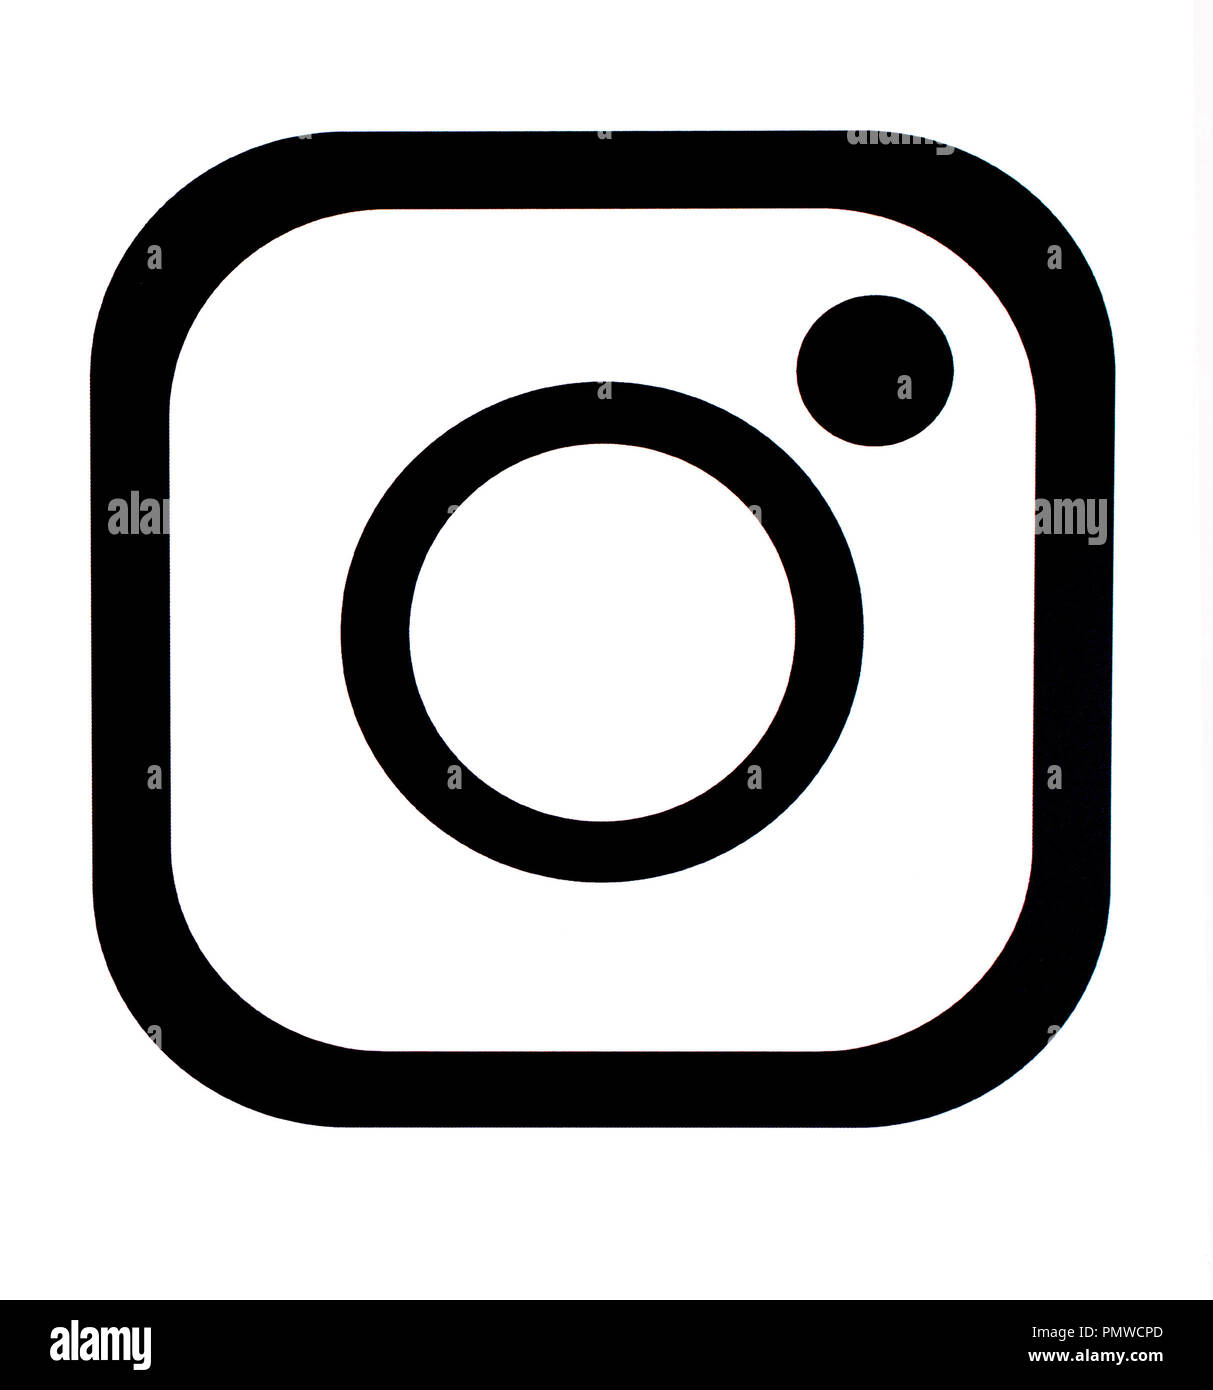 Chisinau,Moldova  September 19, 2018: Instagram new icon printed on white paper. Instagram is an online mobile photo-sharing, video-sharing service. Stock Photo